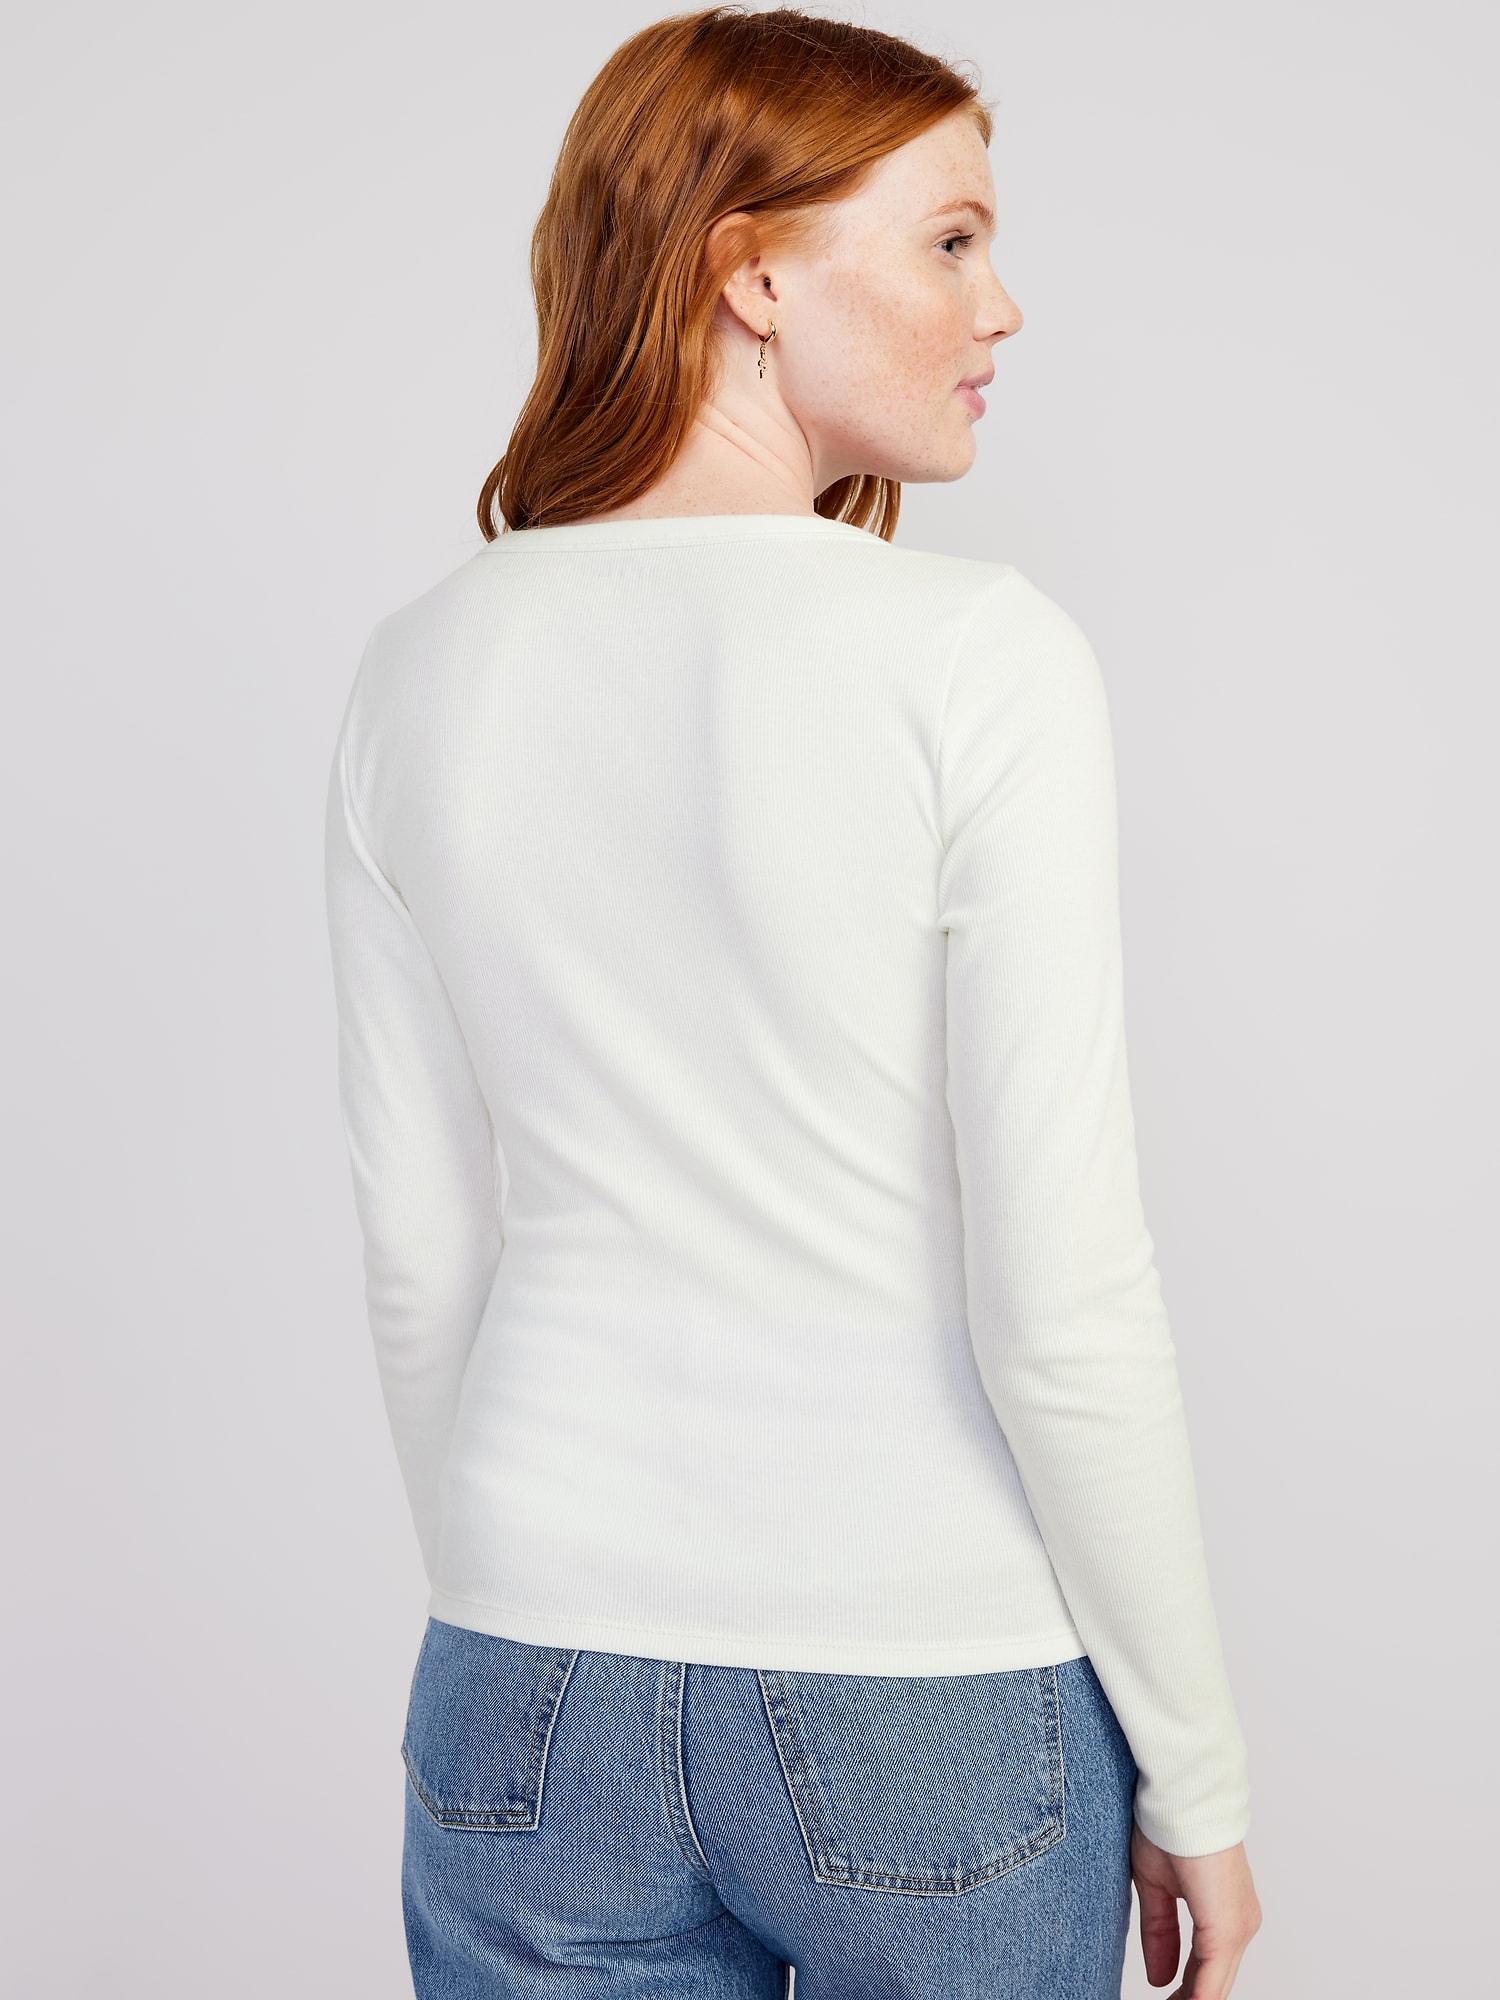 Fitted Rib-Knit Henley T-Shirt for Women | Old Navy